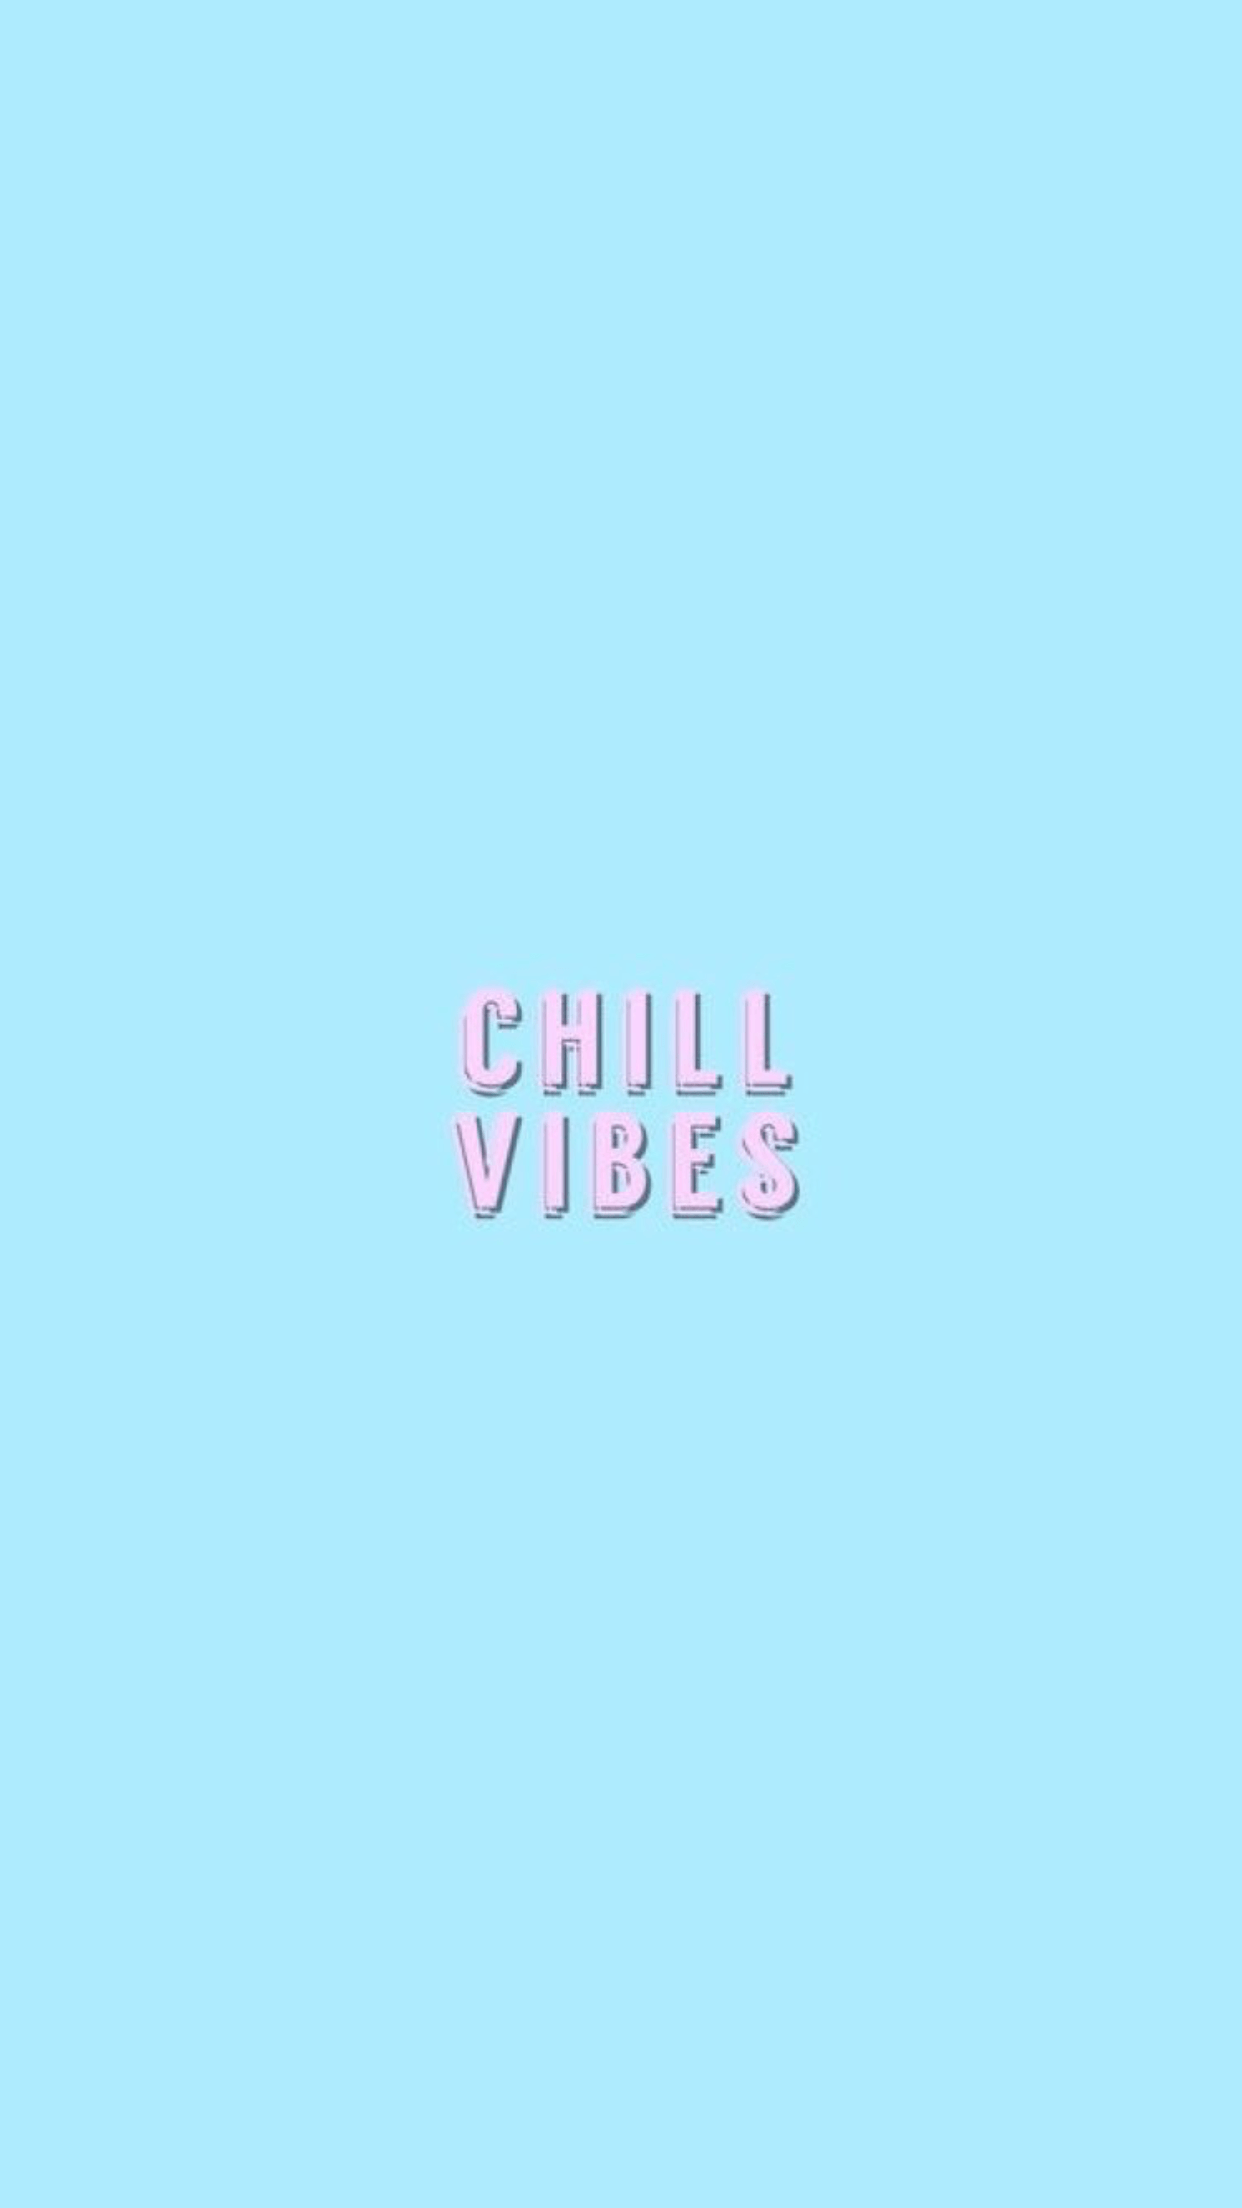 Aesthetic Chill Vibes Wallpaper Free Aesthetic Chill